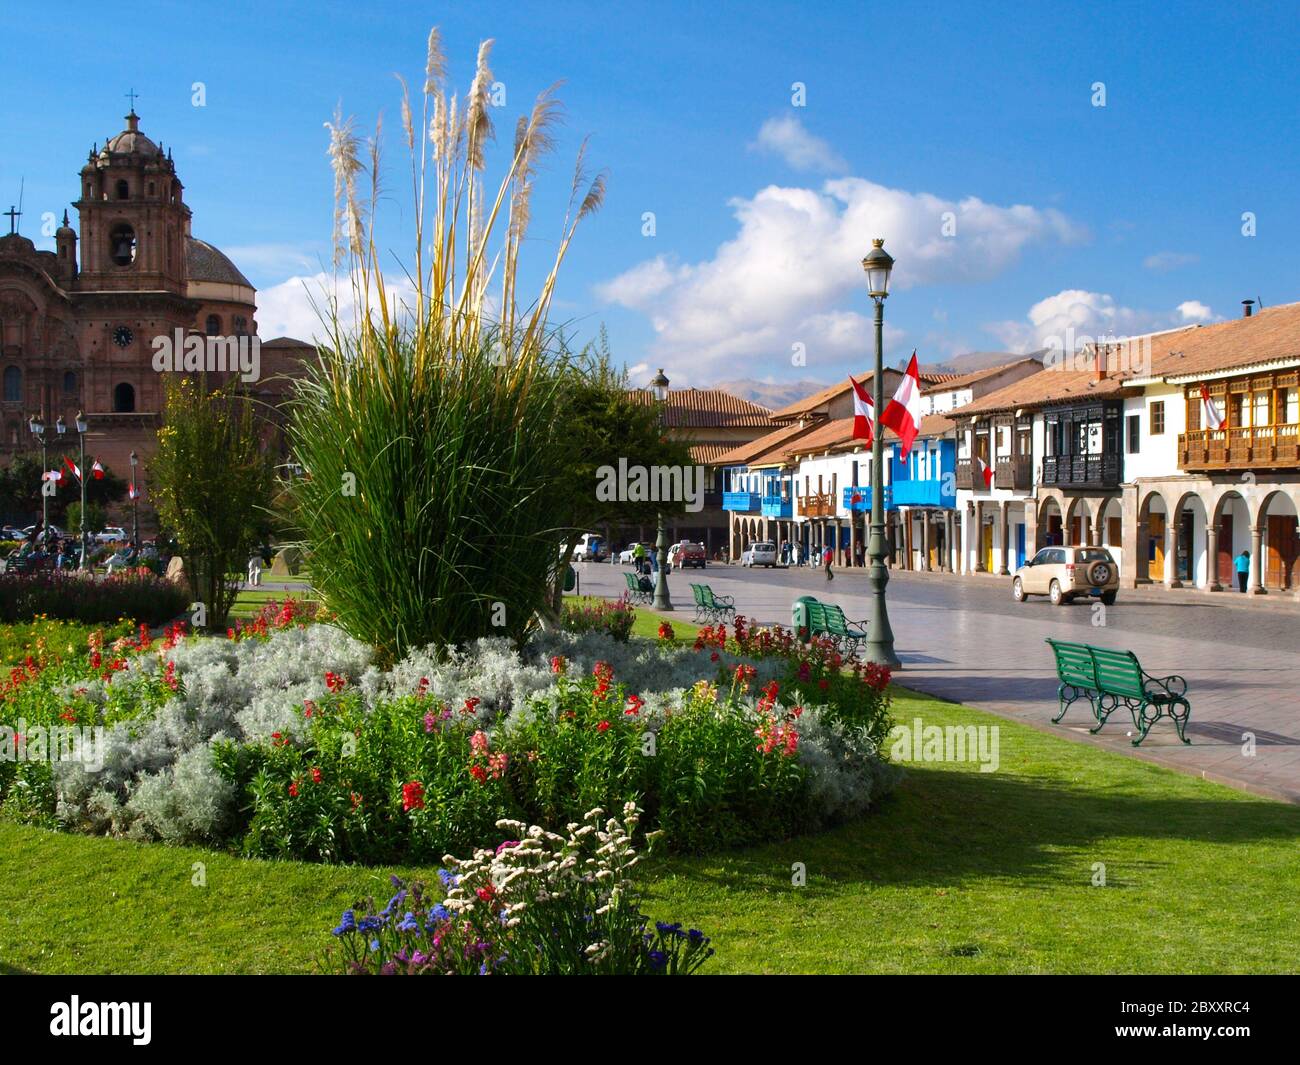 Greenery and colonial architecture of Plaza de Armas in Cusco, Peru Stock Photo